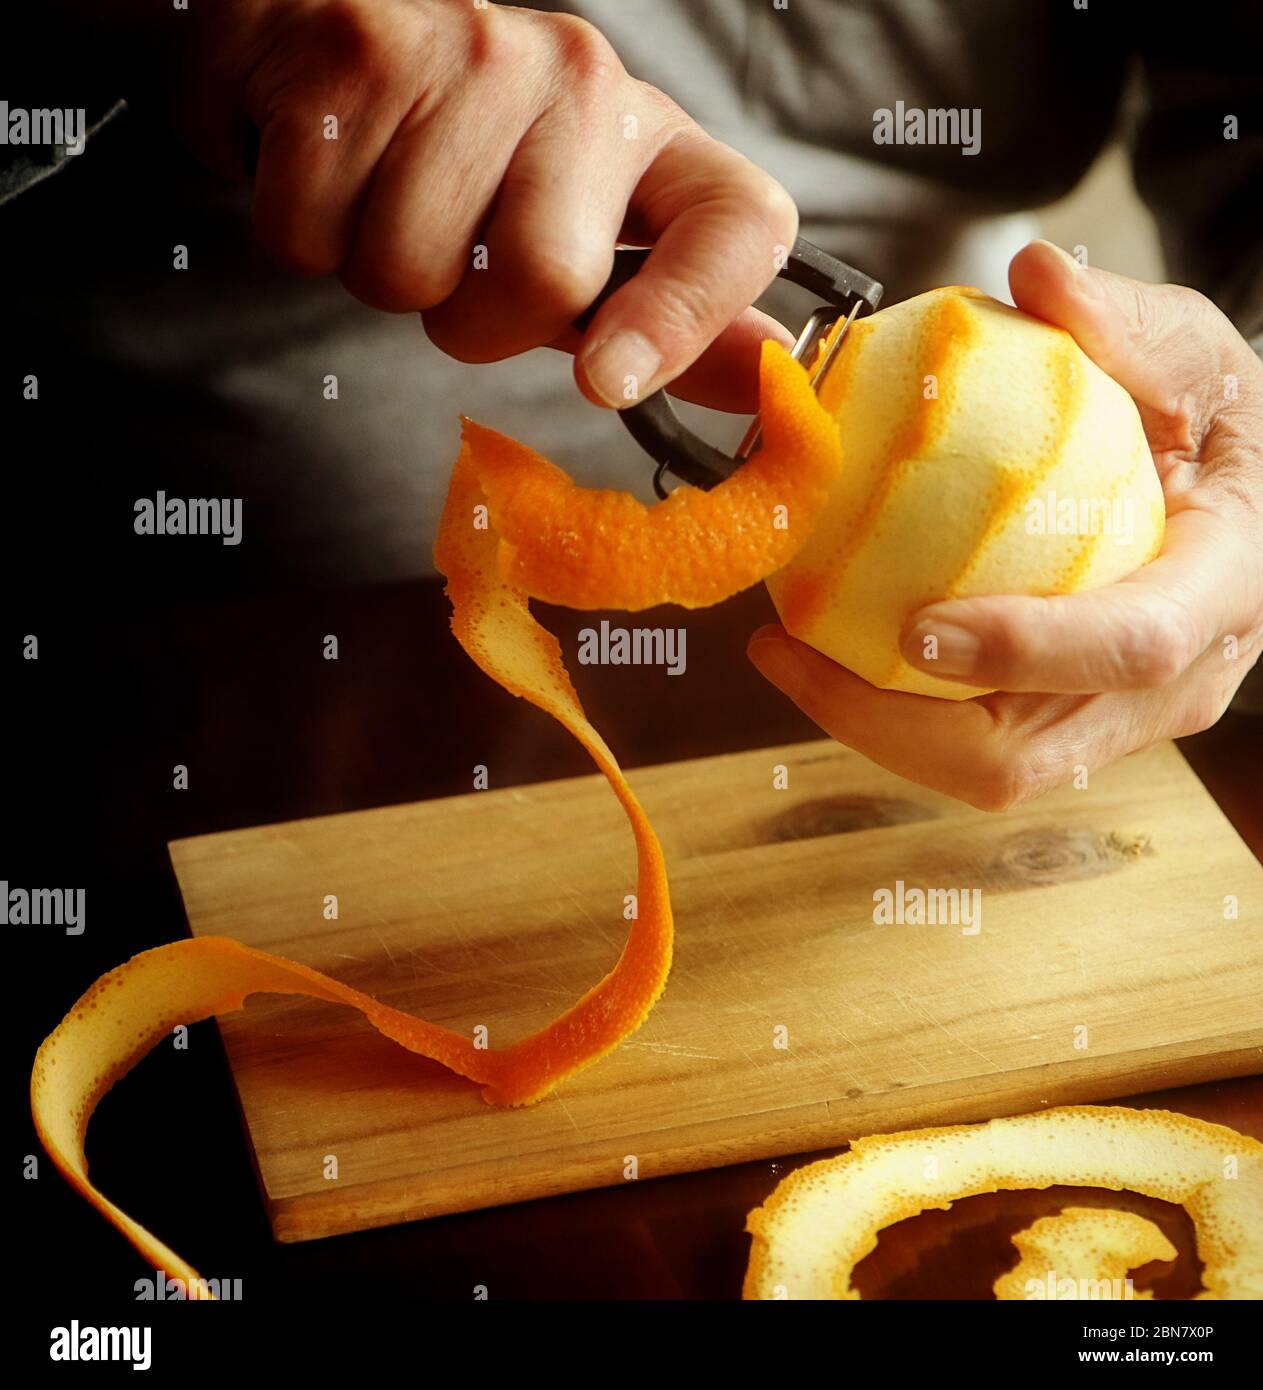 https://c8.alamy.com/comp/2BN7X0P/orange-marmalade-preparation-removing-the-orange-zest-with-a-sharp-vegetable-peeler-to-add-after-to-the-marmalade-2BN7X0P.jpg